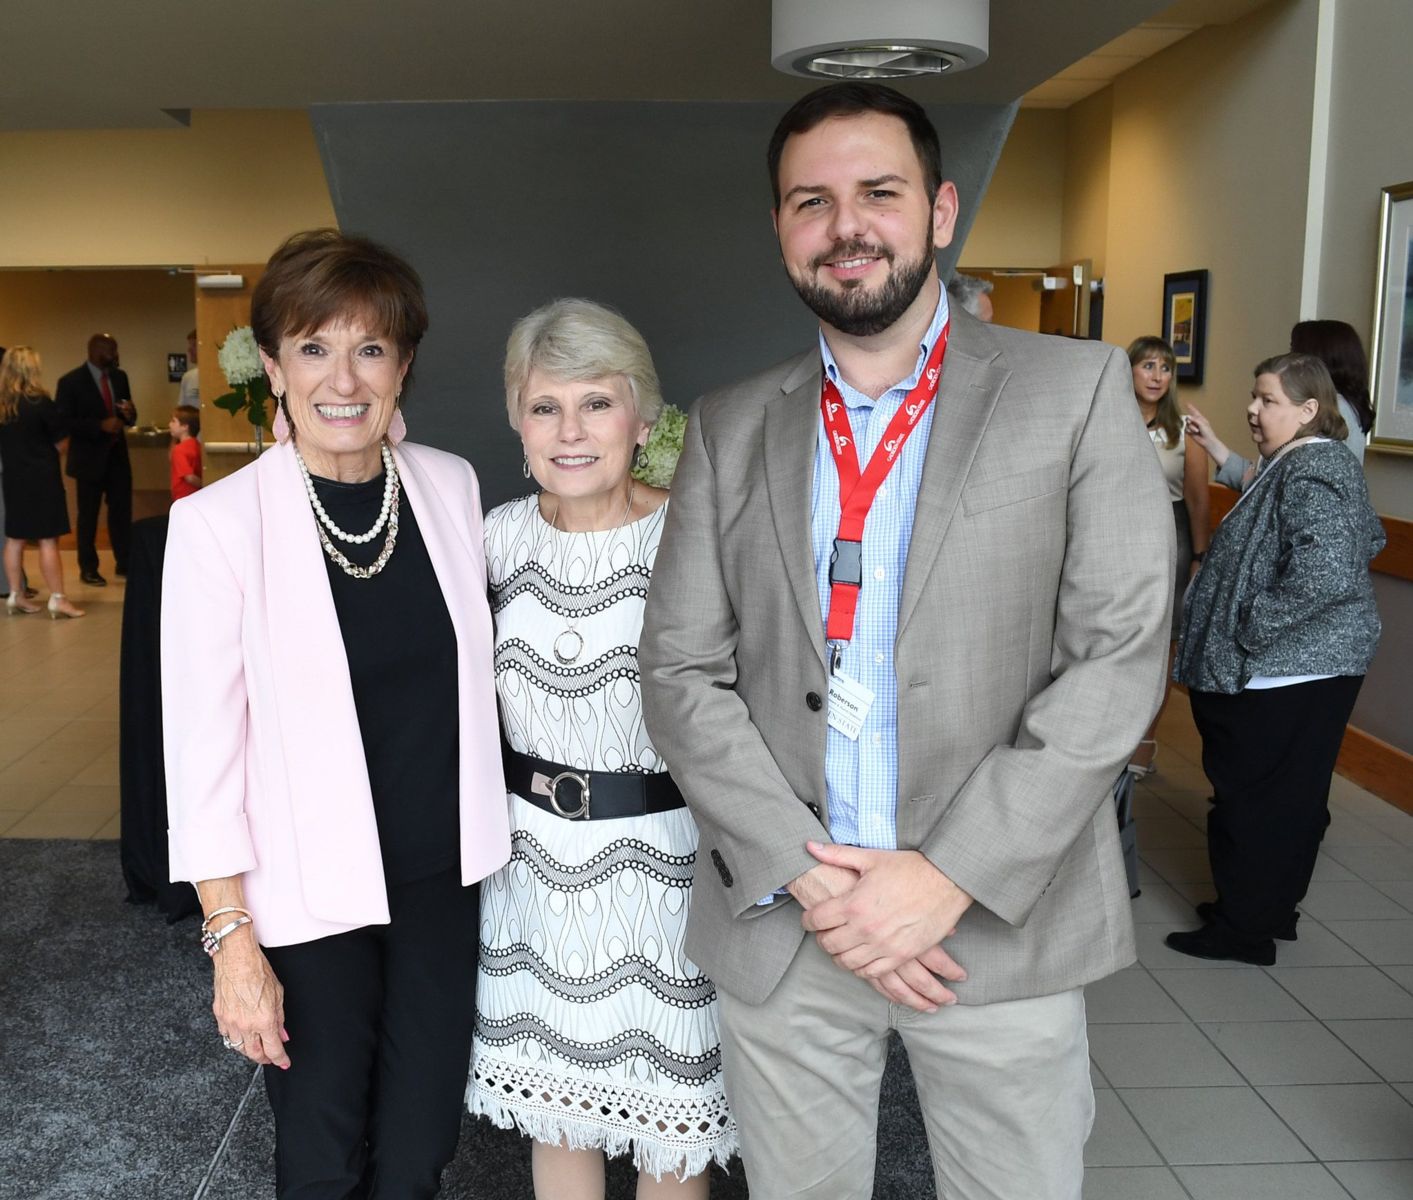 Dr. Martha Lavender, left, retired president of Gadsden State, is pictured with Dr. Kathy Murphy, current president, and John Roberson, director of Advancement and Alumni Relations, at the naming ceremony for the Dr. Martha Lavender Boardroom